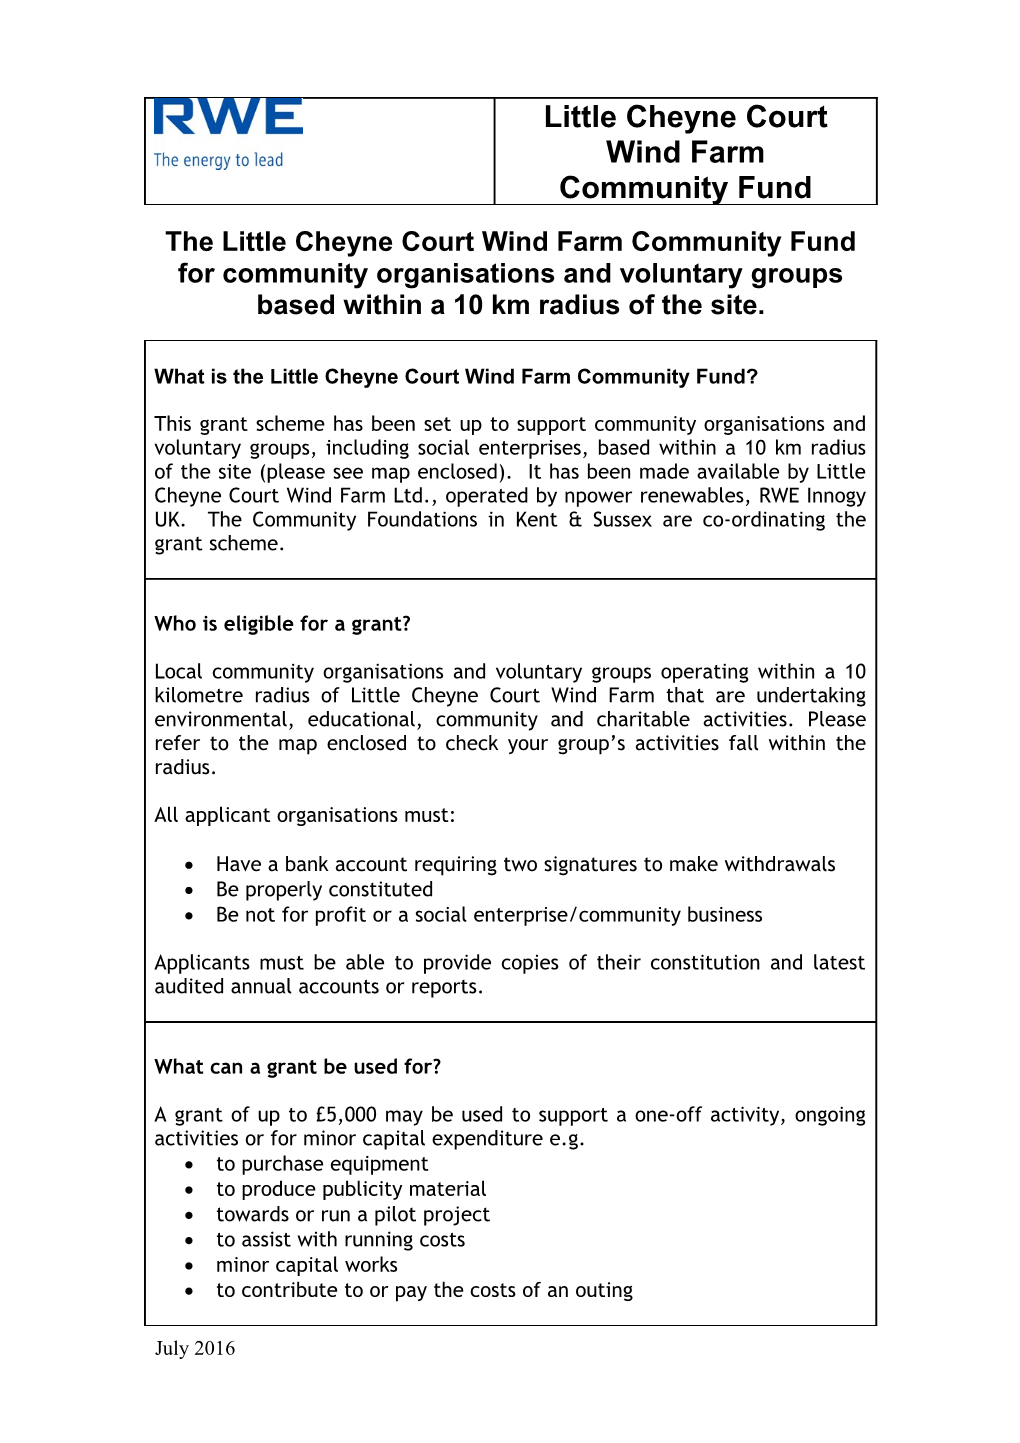 The Little Cheyne Court Wind Farm Community Fund for Community Organisations and Voluntary